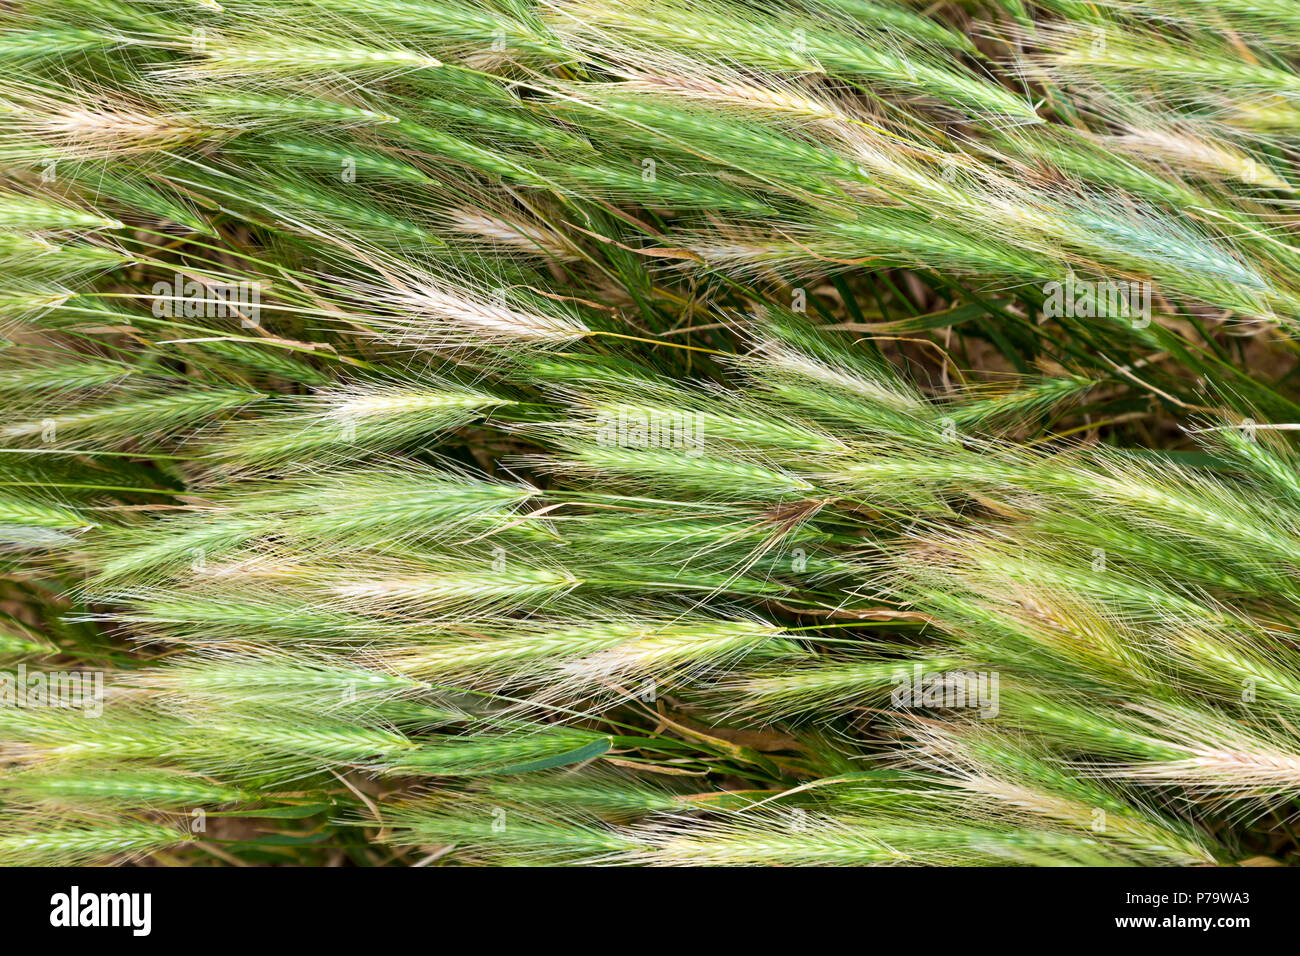 Field of young green rye ears Stock Photo